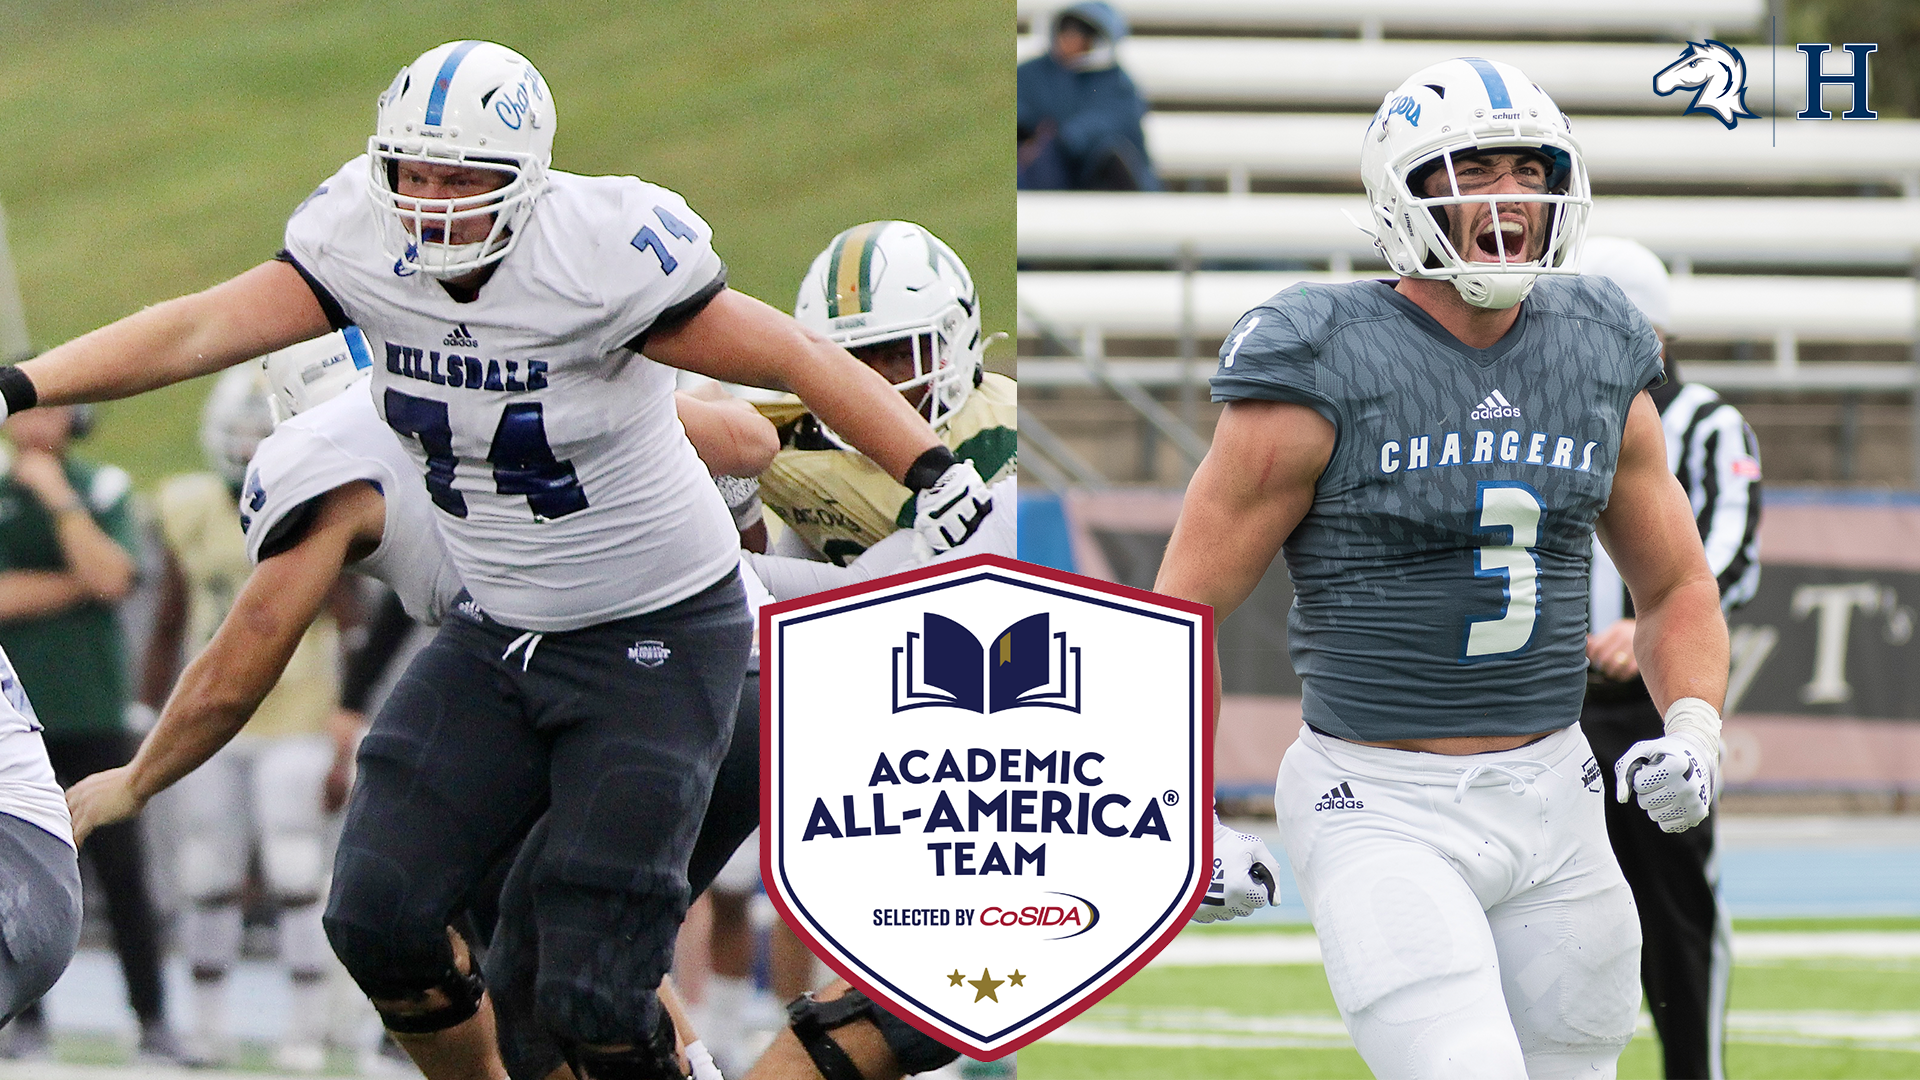 Chargers' Anschutz, Johnson repeat as CoSIDA Academic All-American honorees in 2021